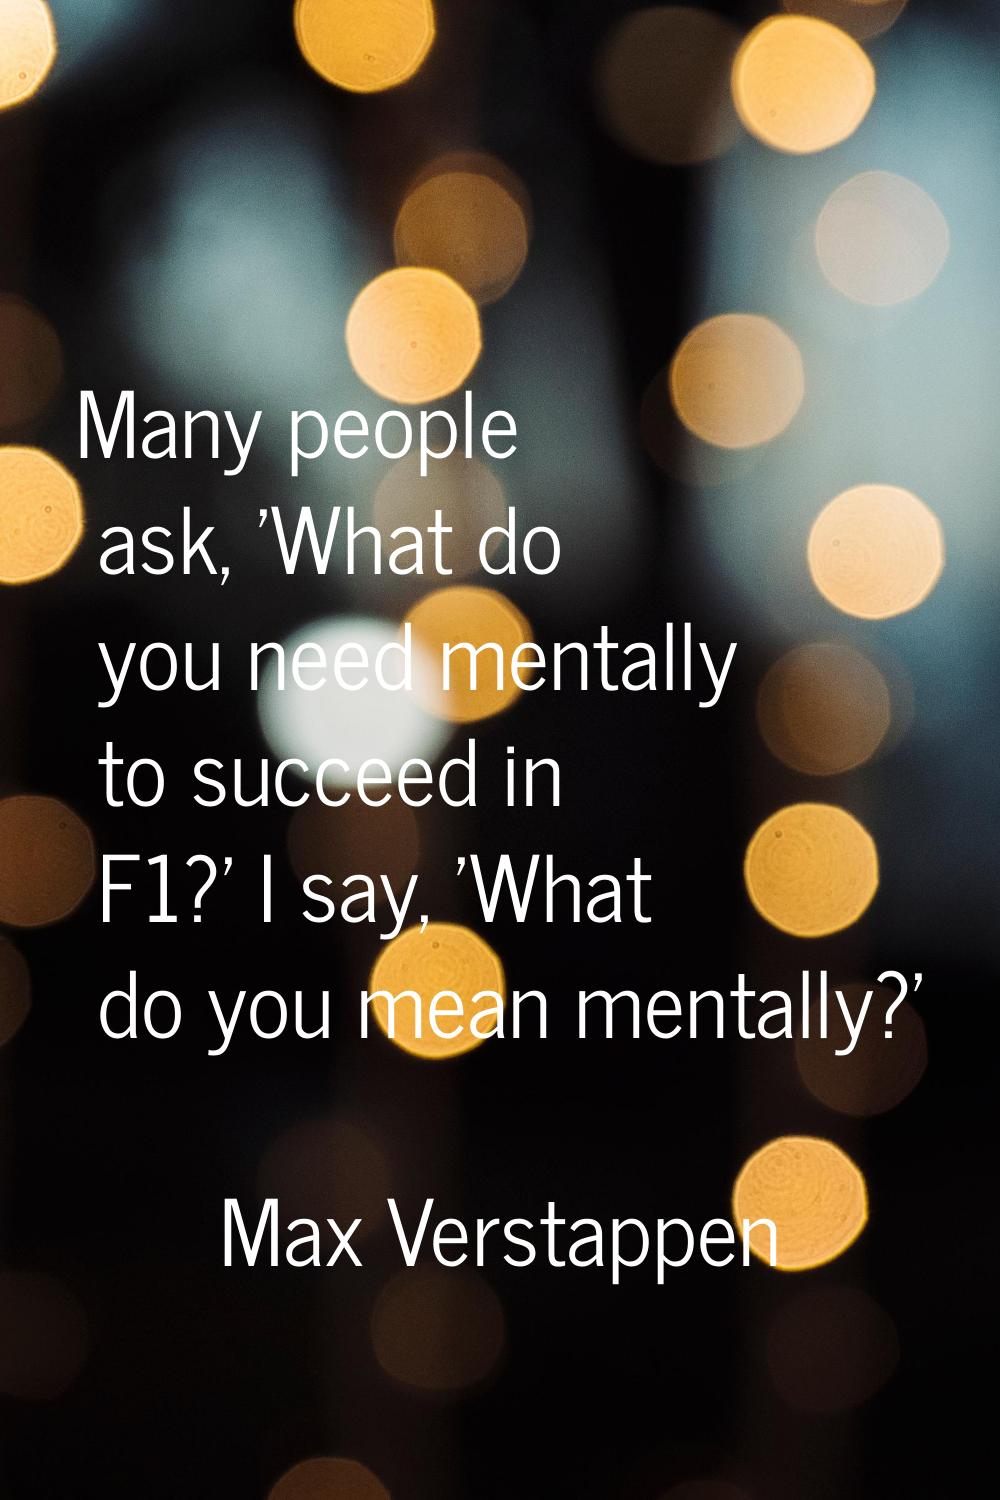 Many people ask, 'What do you need mentally to succeed in F1?' I say, 'What do you mean mentally?'